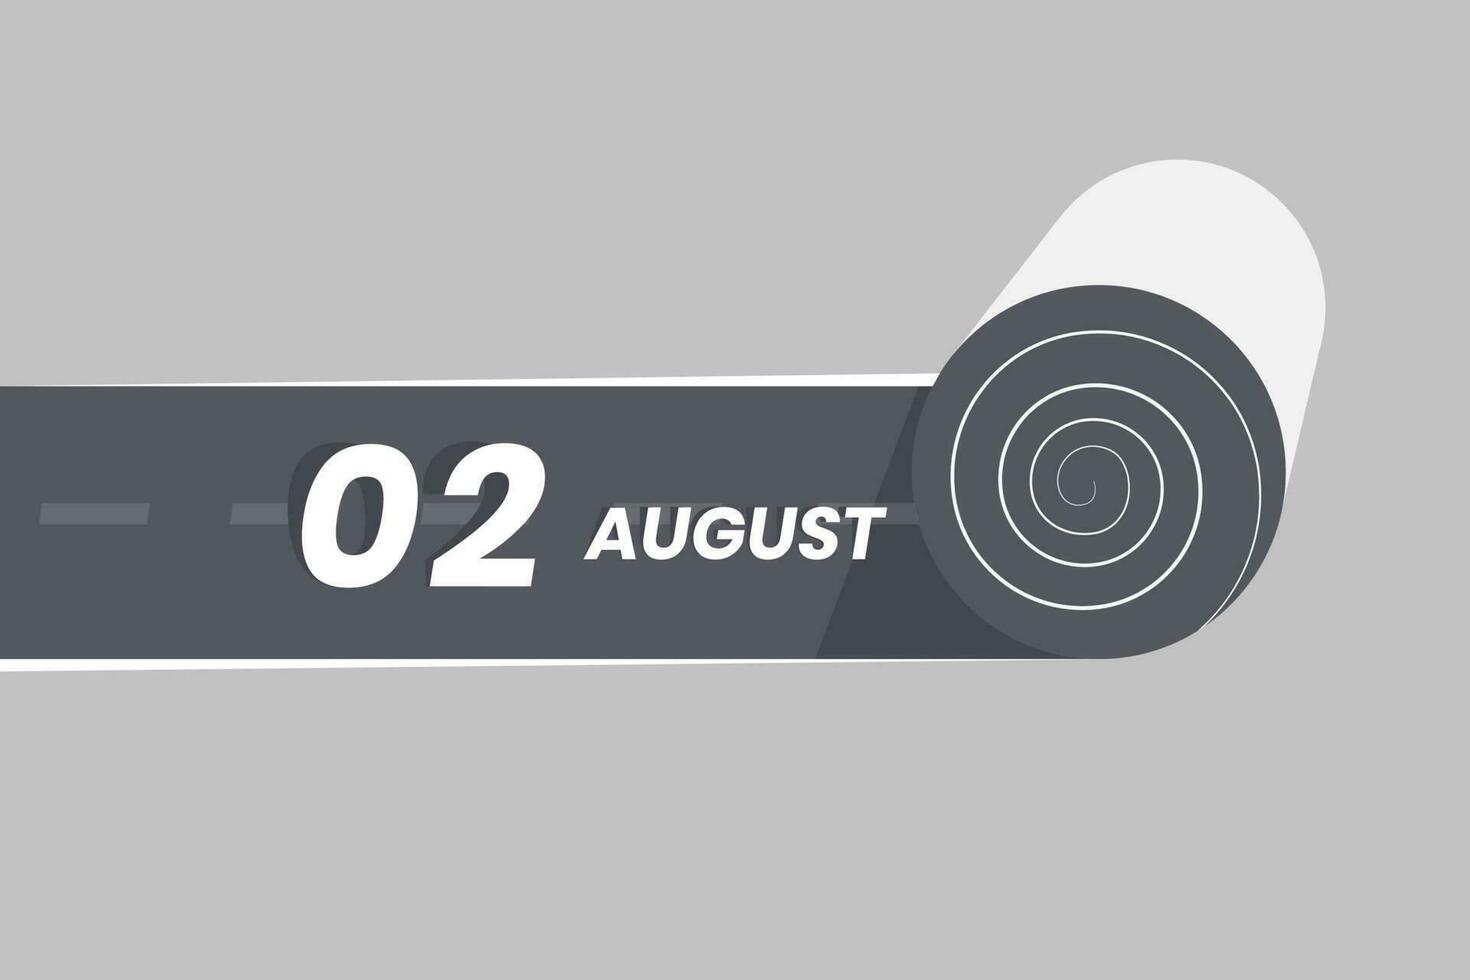 August 2 calendar icon rolling inside the road. 2 August Date Month icon vector illustrator.